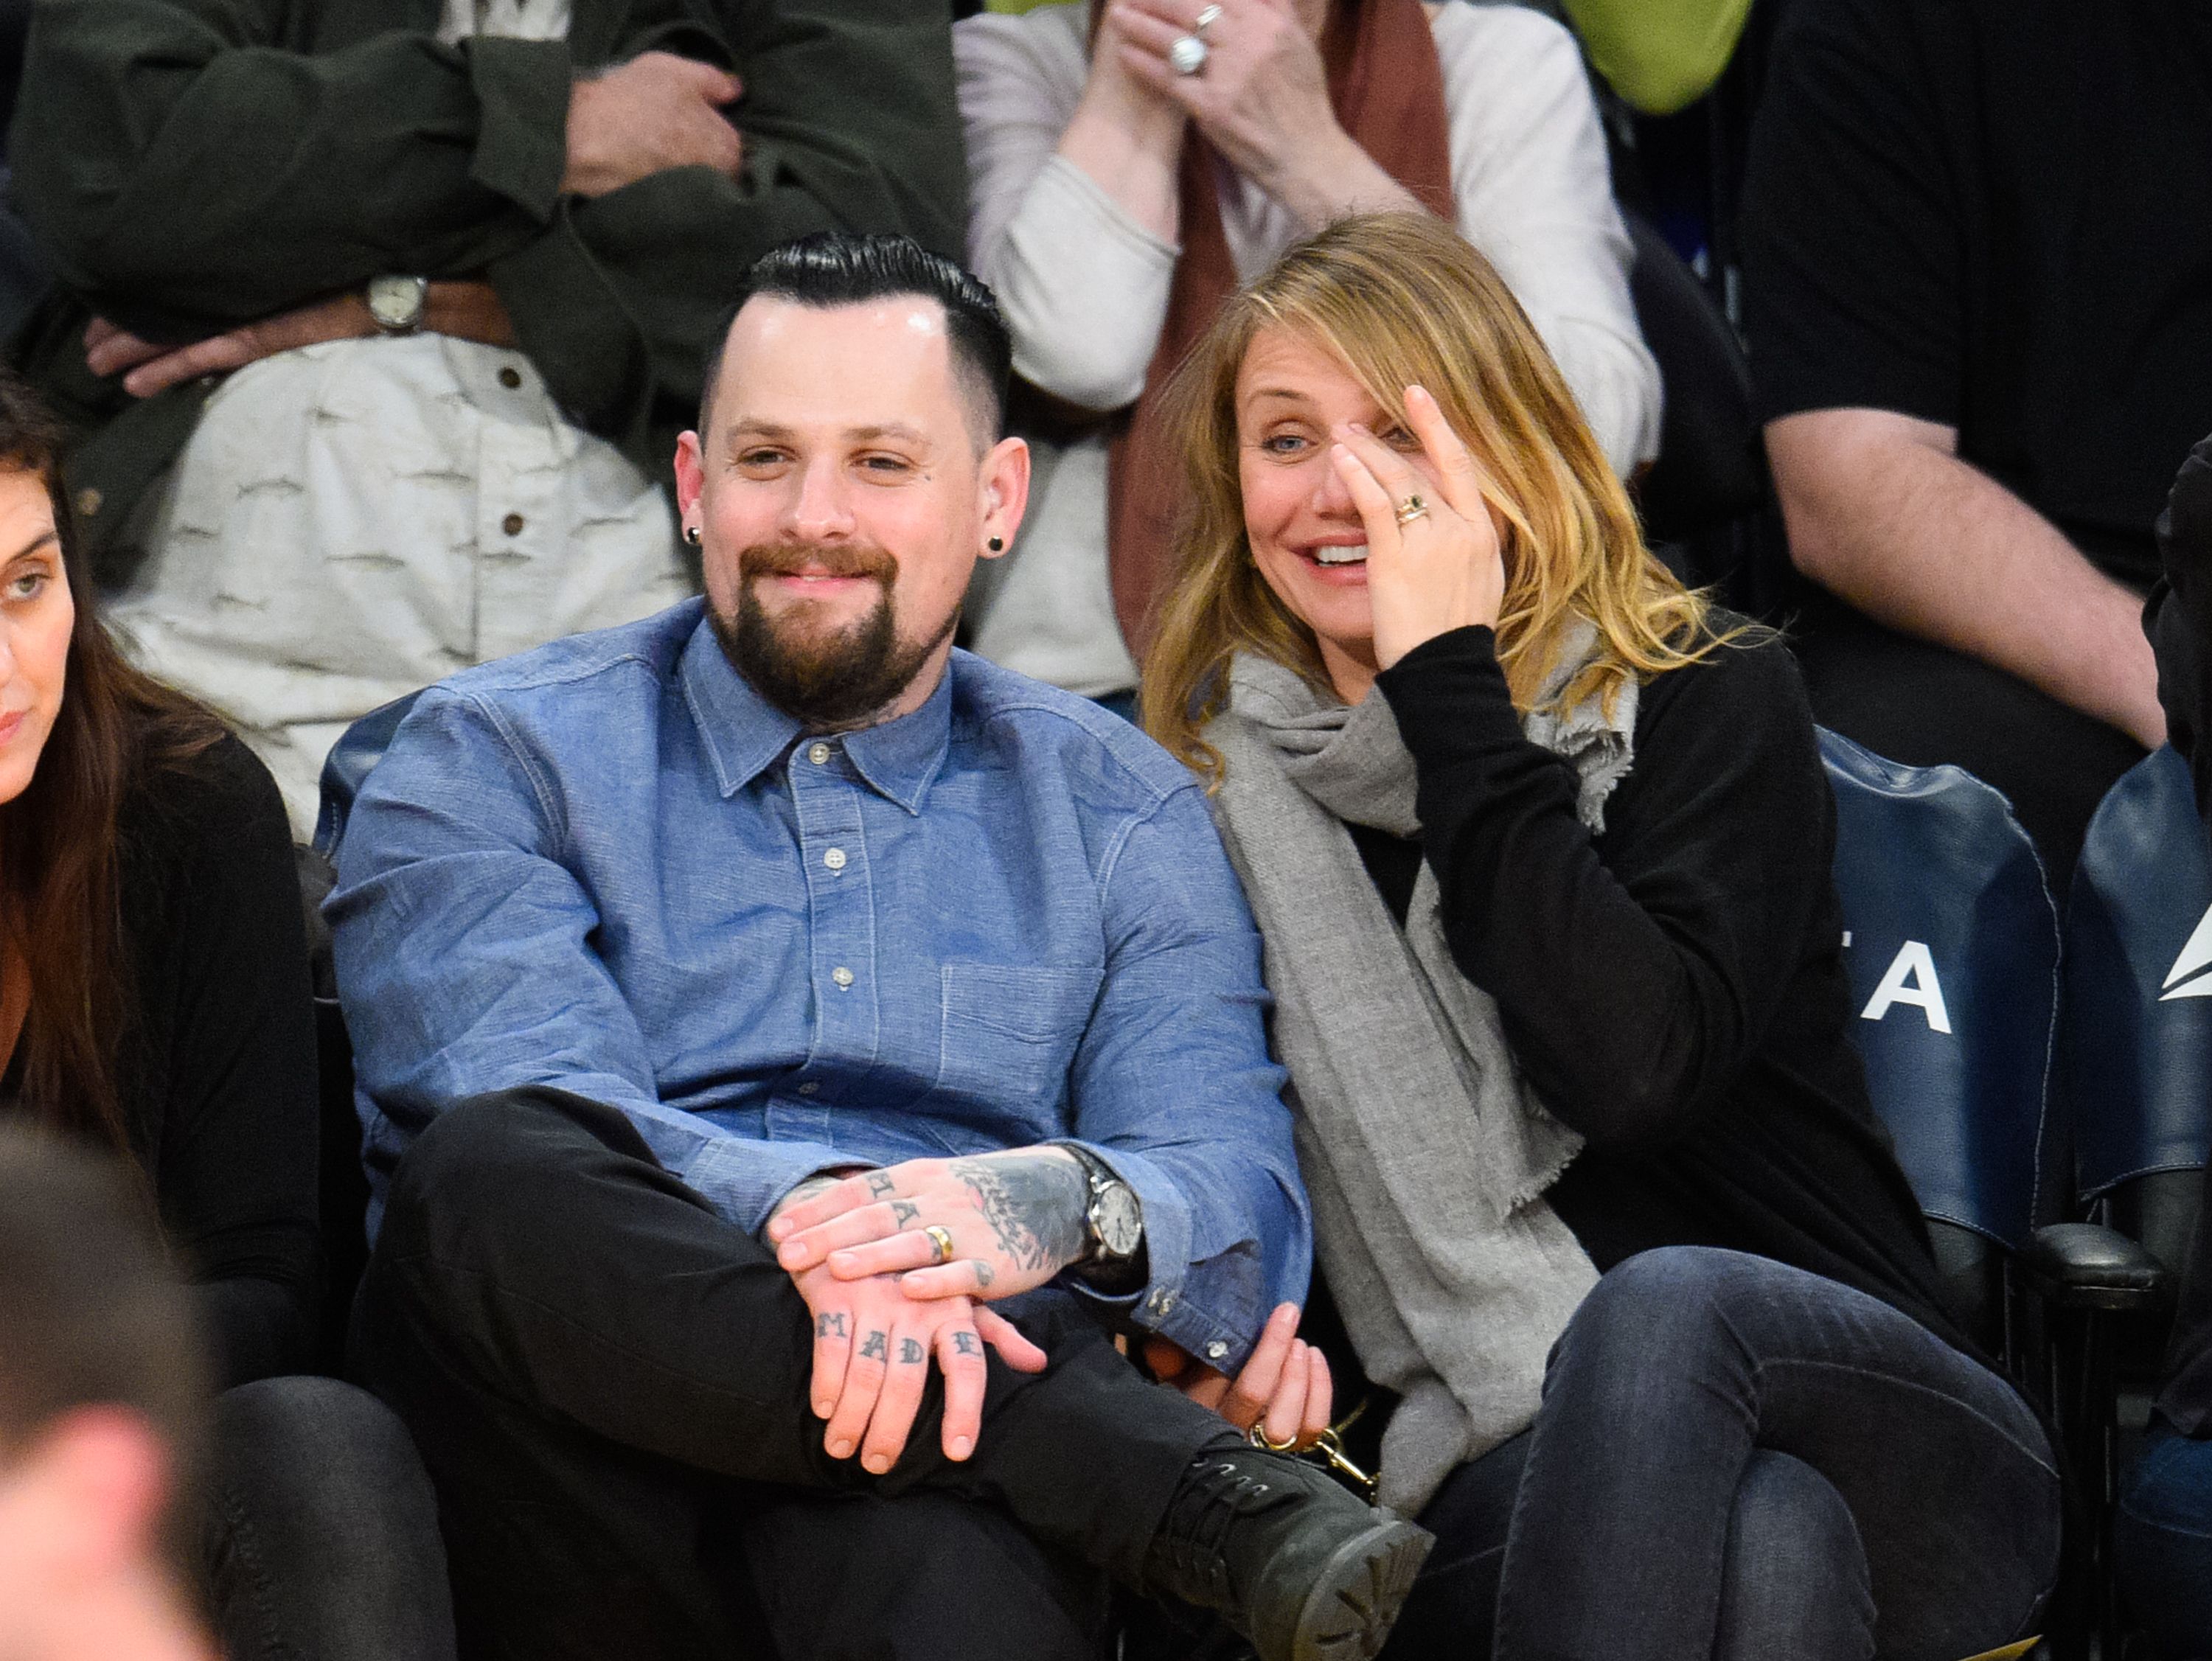 Benji Madden and Cameron Diaz at a basketball game held at Staples Center on January 27, 2015, in Los Angeles, California | Photo: Getty Images